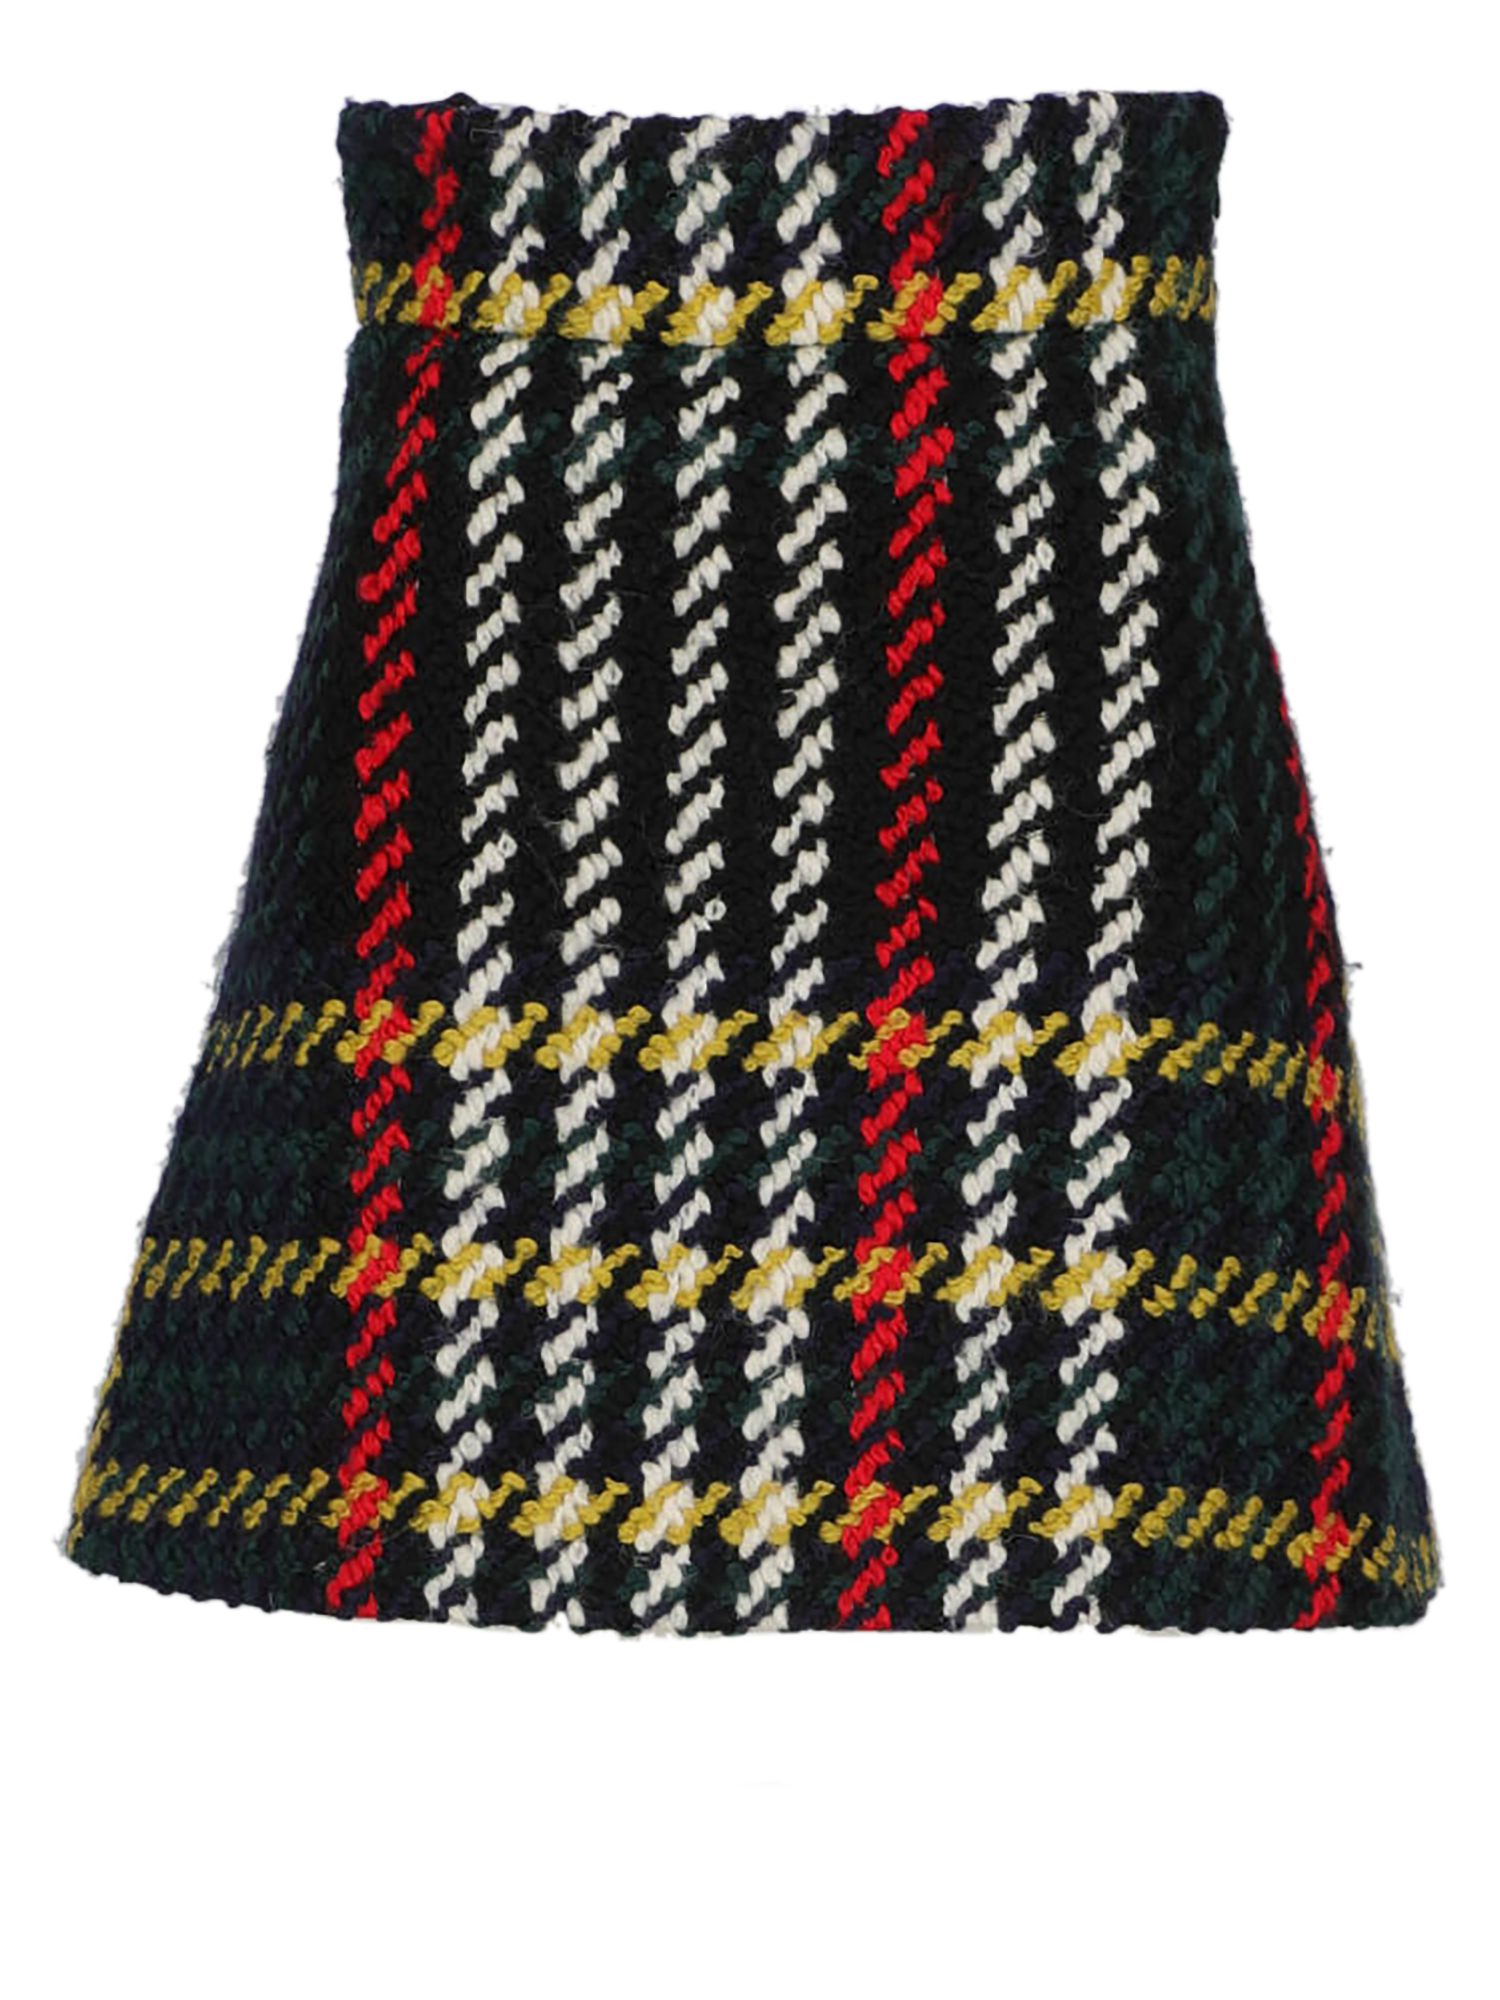 Condition: Very Good, Other Patterns Wool, Color: Black, White, Yellow - XS - IT 38 -